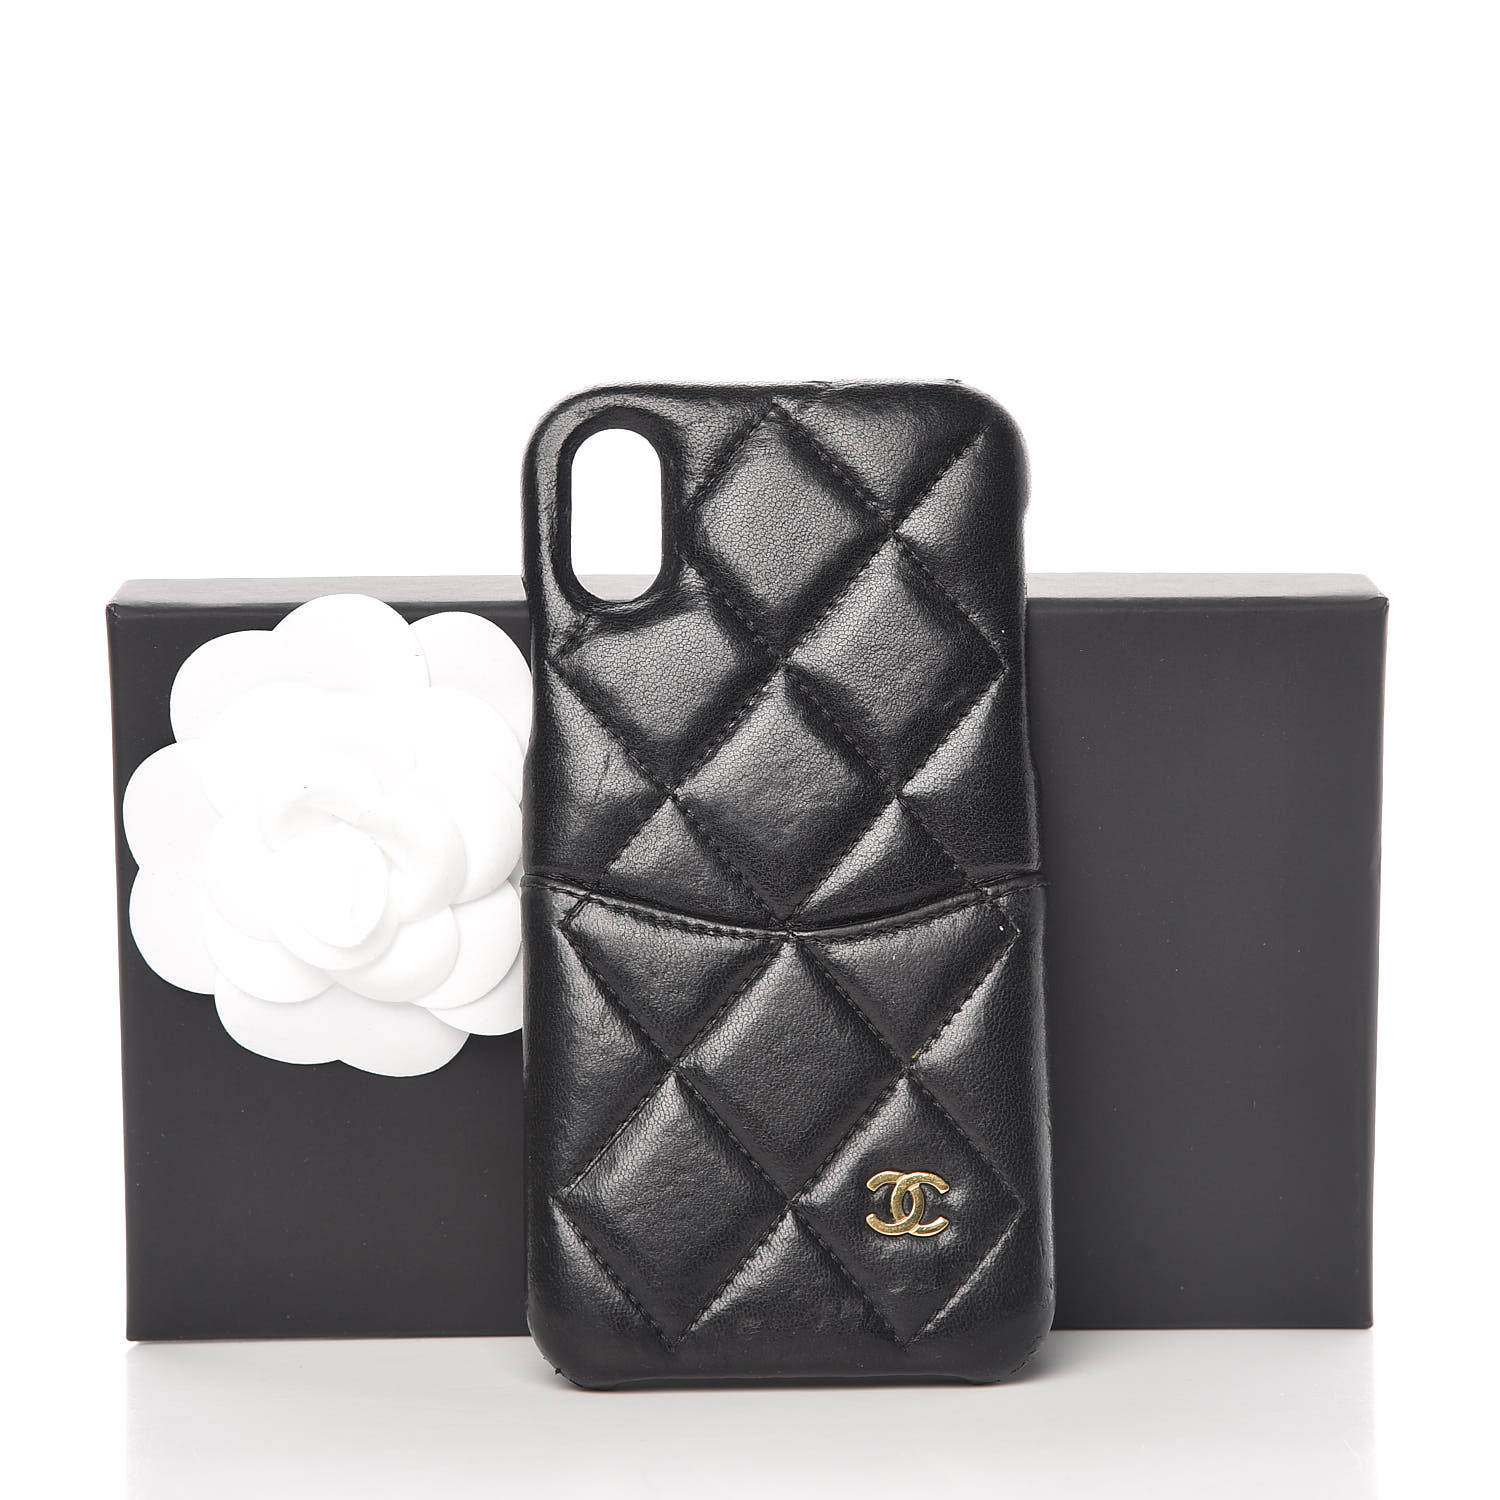 Chanel Lambskin Quilted Iphone X Case Black Fashionphile